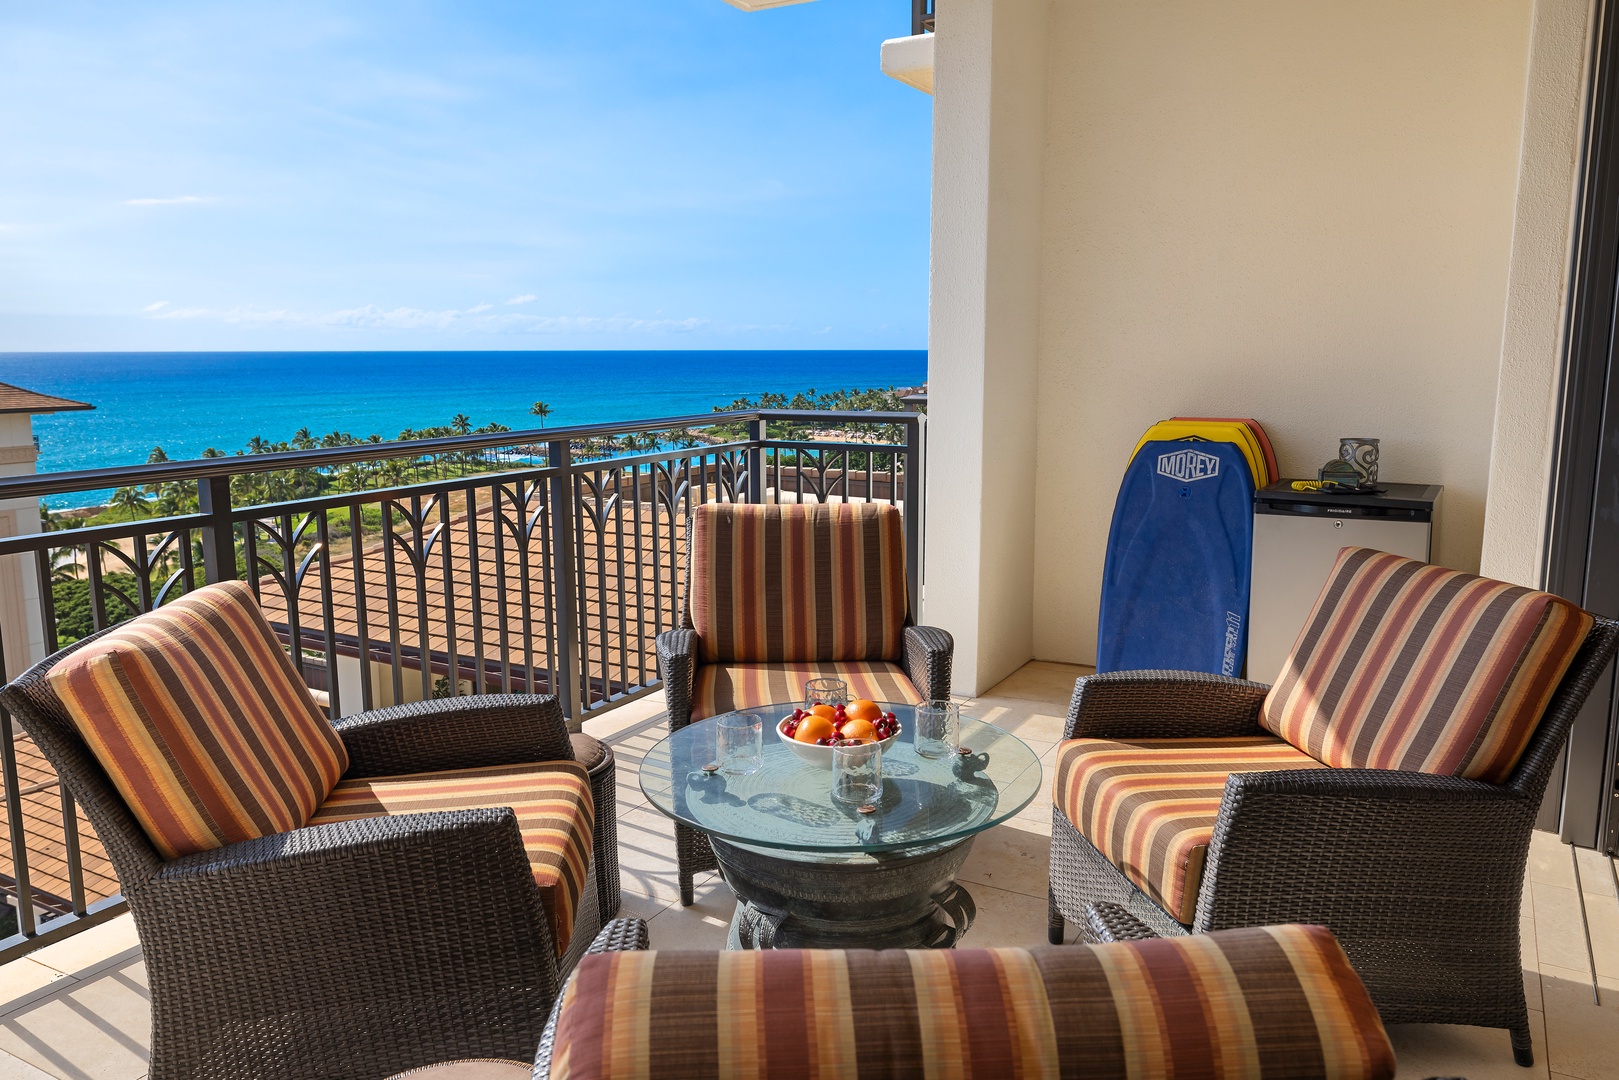 Kapolei Vacation Rentals, Ko Olina Beach Villas O1402 - A balcony set against a stunning ocean view, ready for relaxation or a meal.